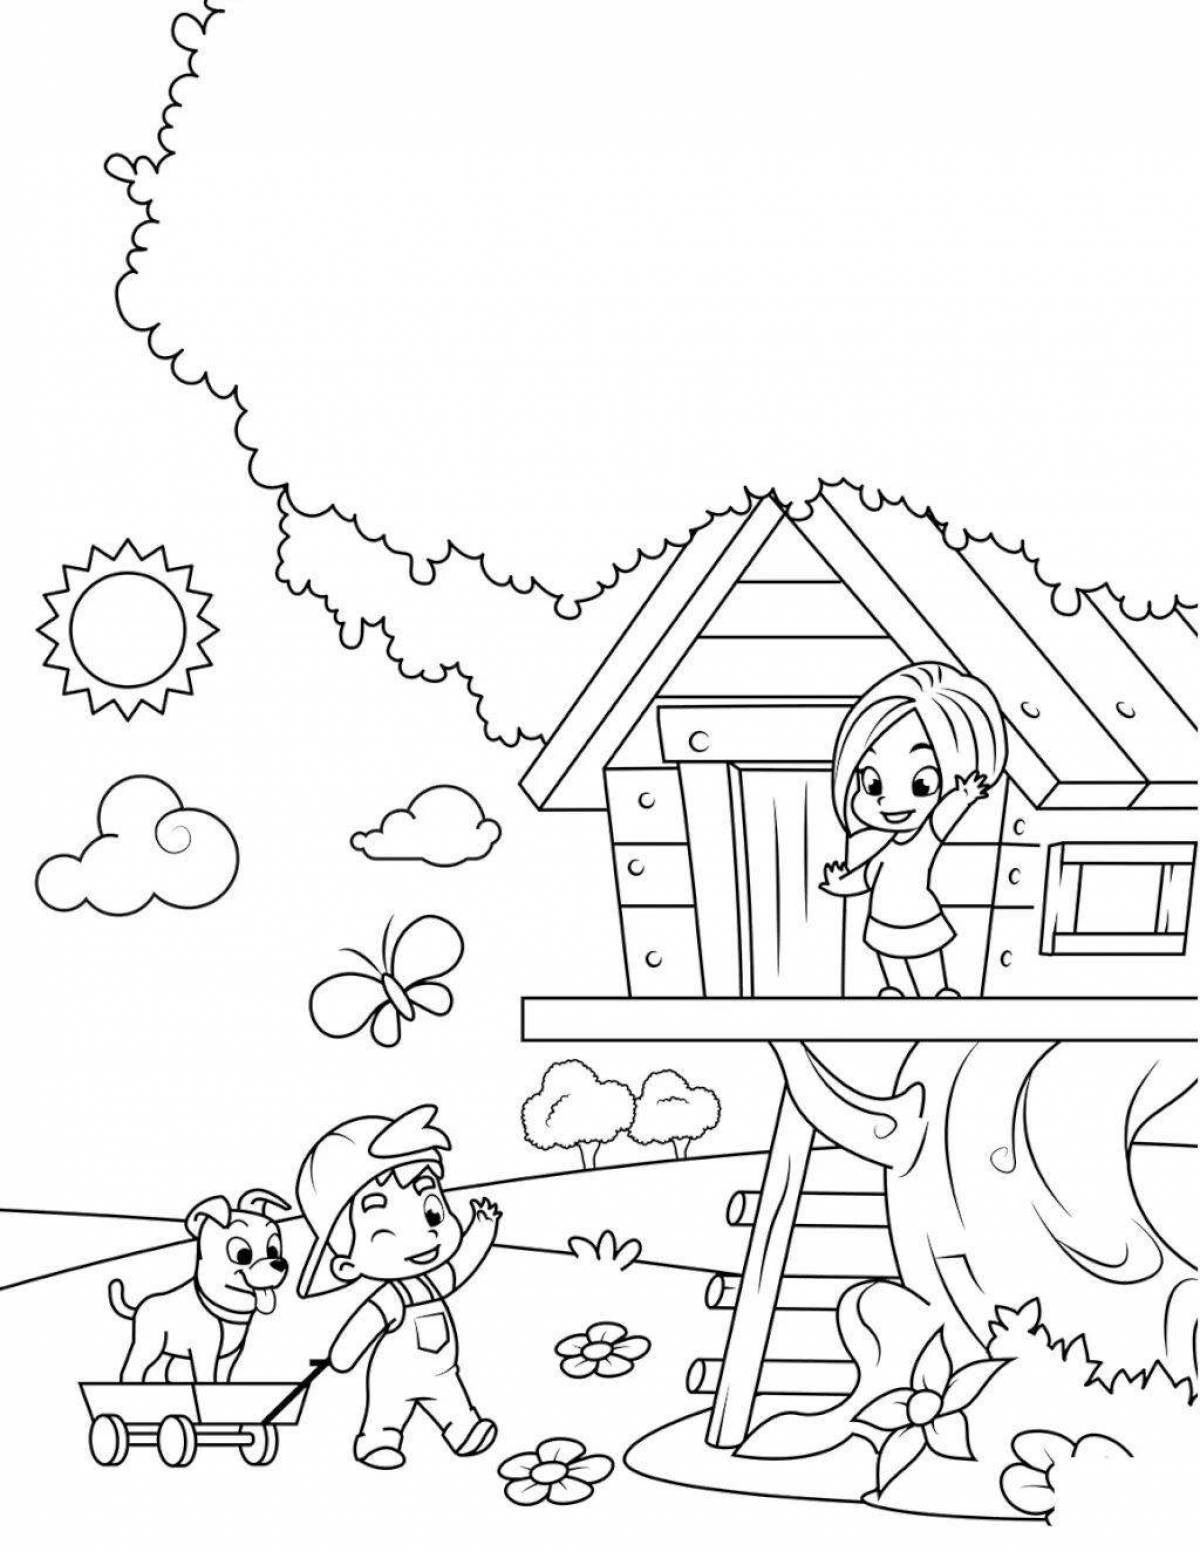 Creative home game coloring page